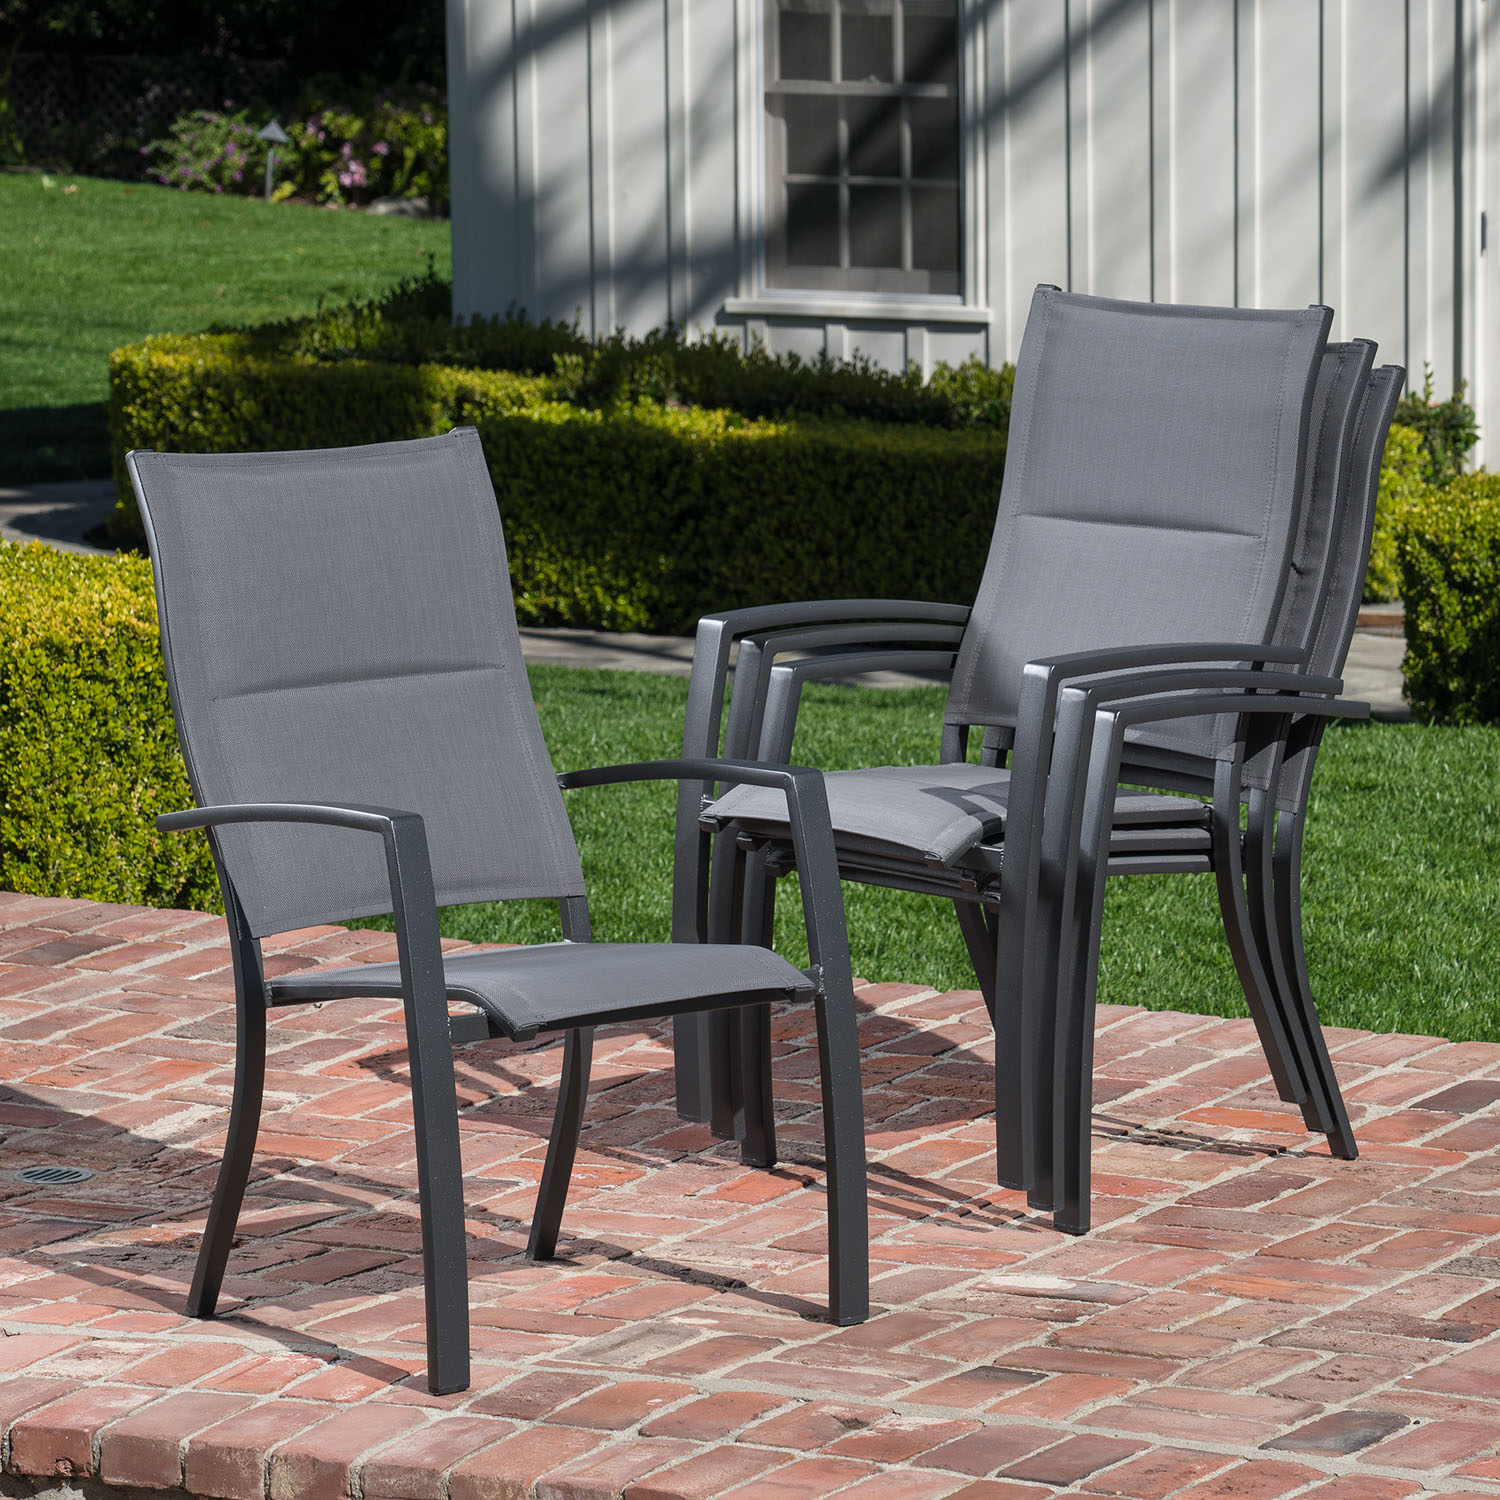 Hanover Fresno 7-Piece Outdoor Dining Set with 6 Padded Sling Chairs and a 42" x 83" Glass-Top Table - image 5 of 12